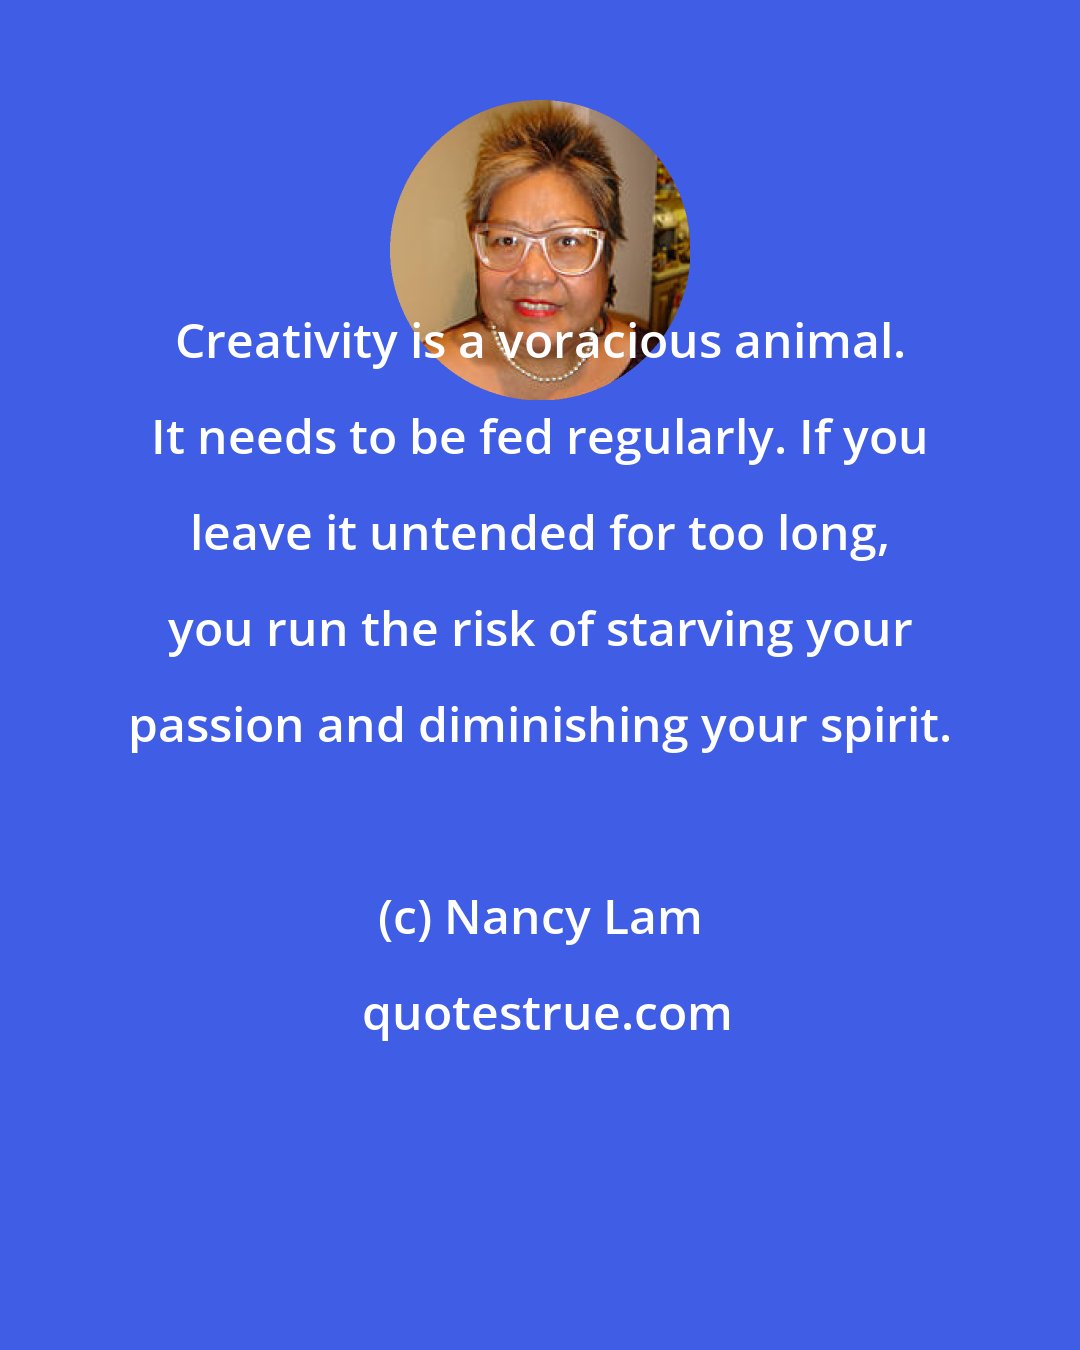 Nancy Lam: Creativity is a voracious animal. It needs to be fed regularly. If you leave it untended for too long, you run the risk of starving your passion and diminishing your spirit.